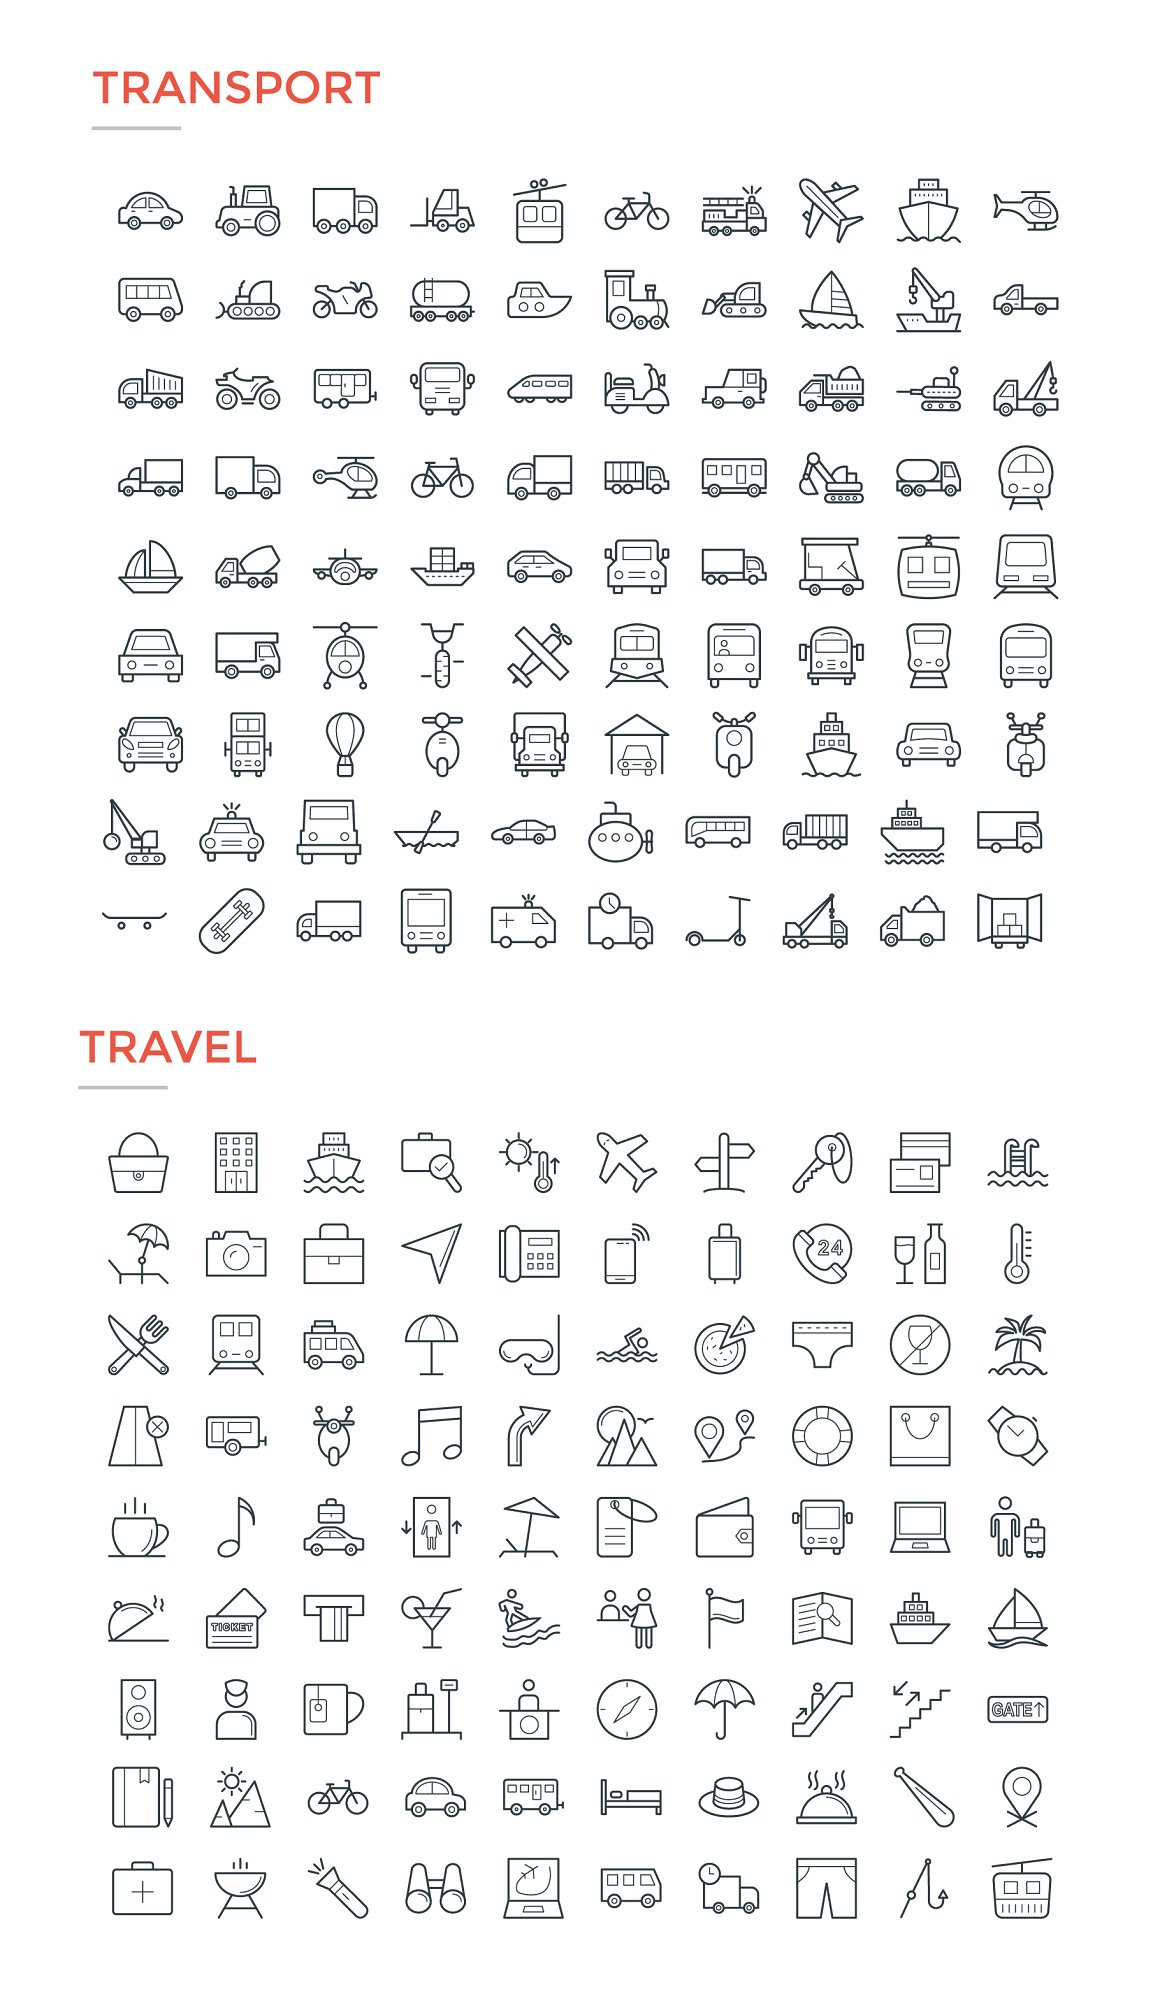 Bundle of transport and travel icons on a white background.